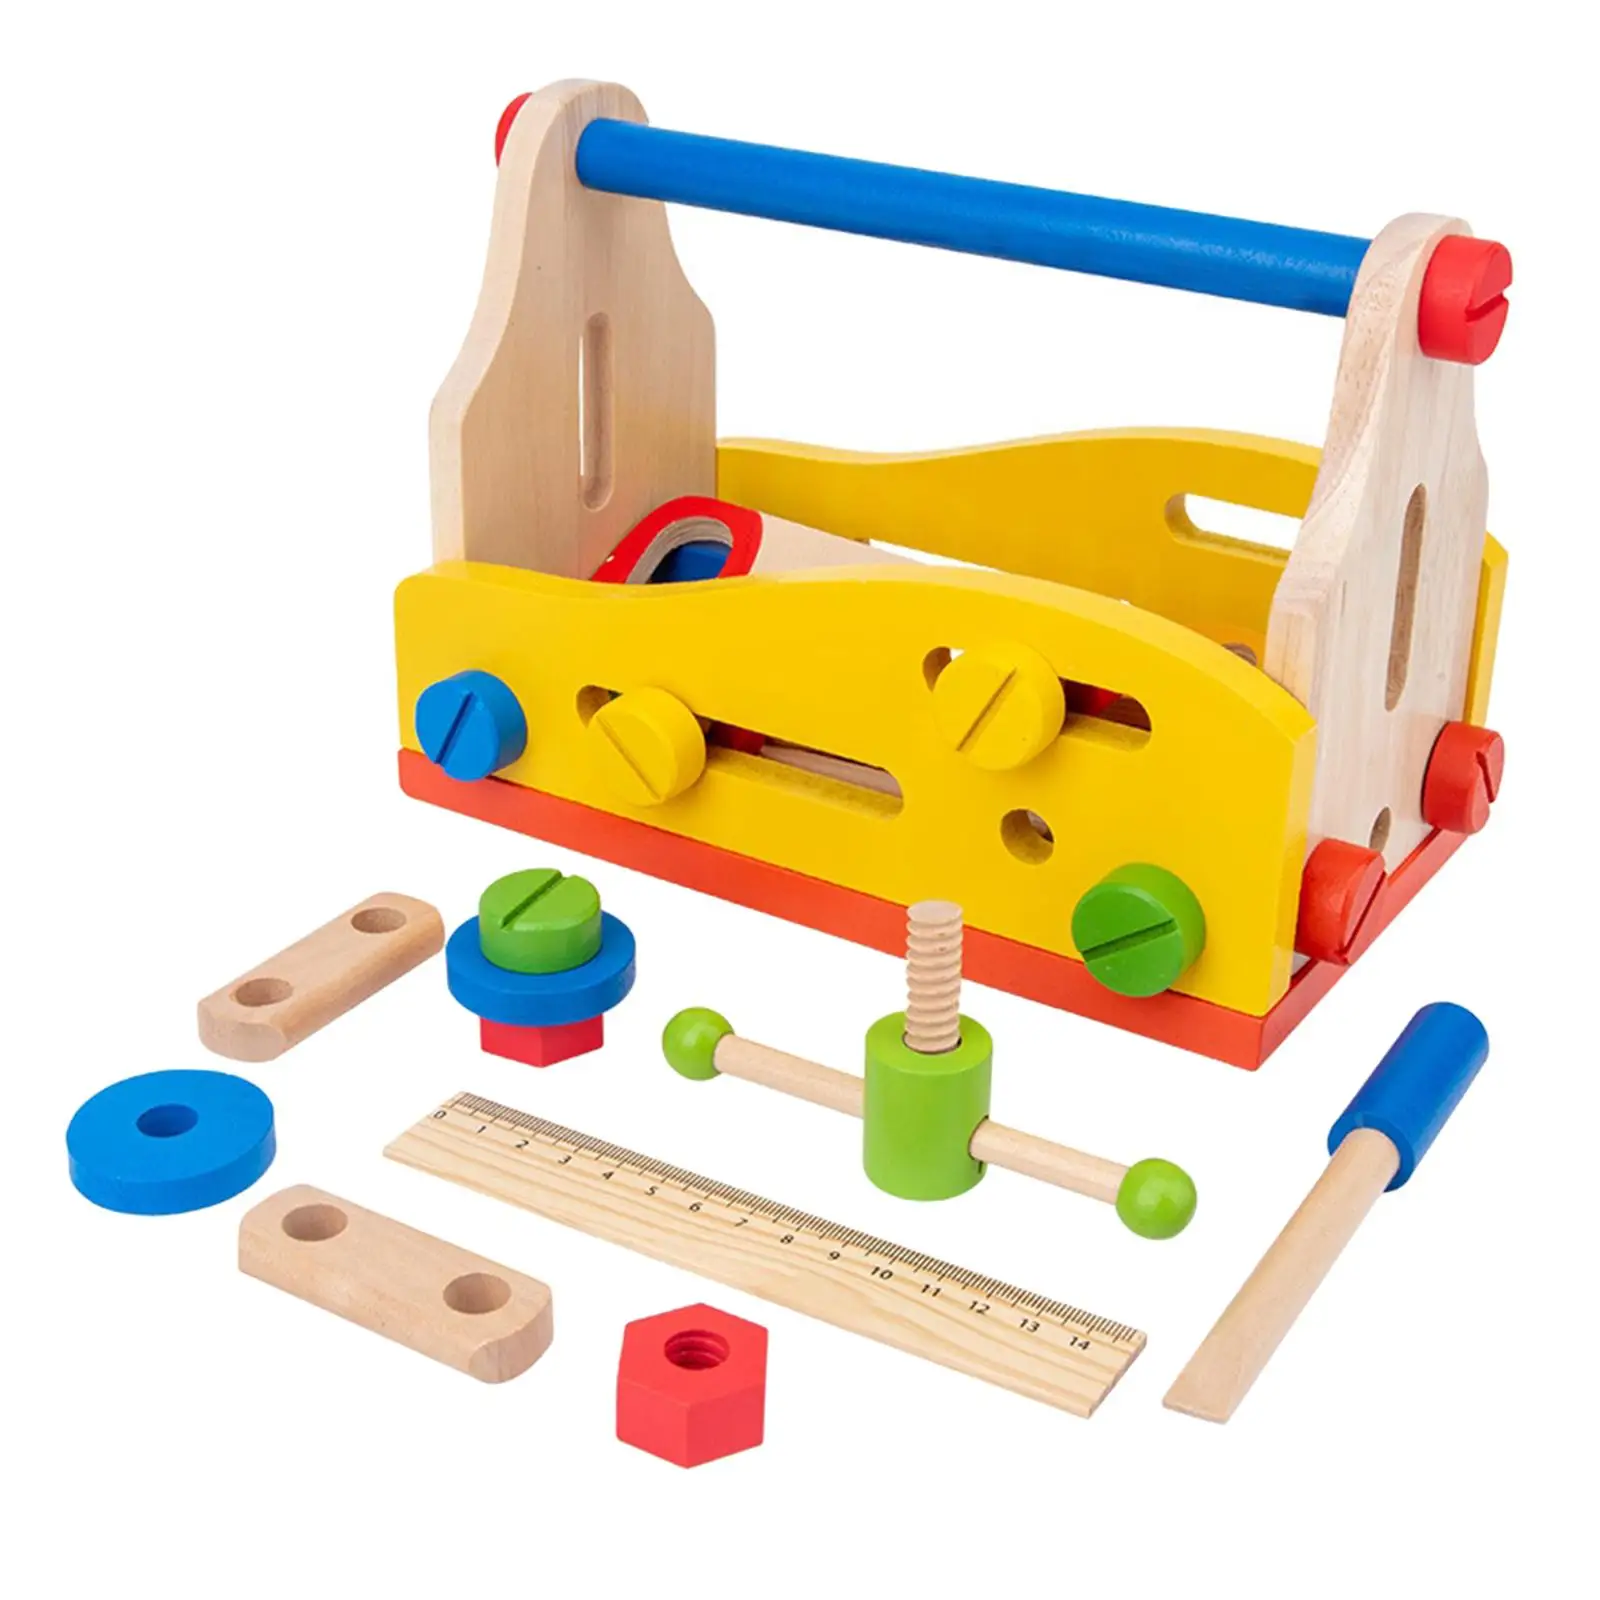 Wooden Tool Toy Learning Educational Tool for Children